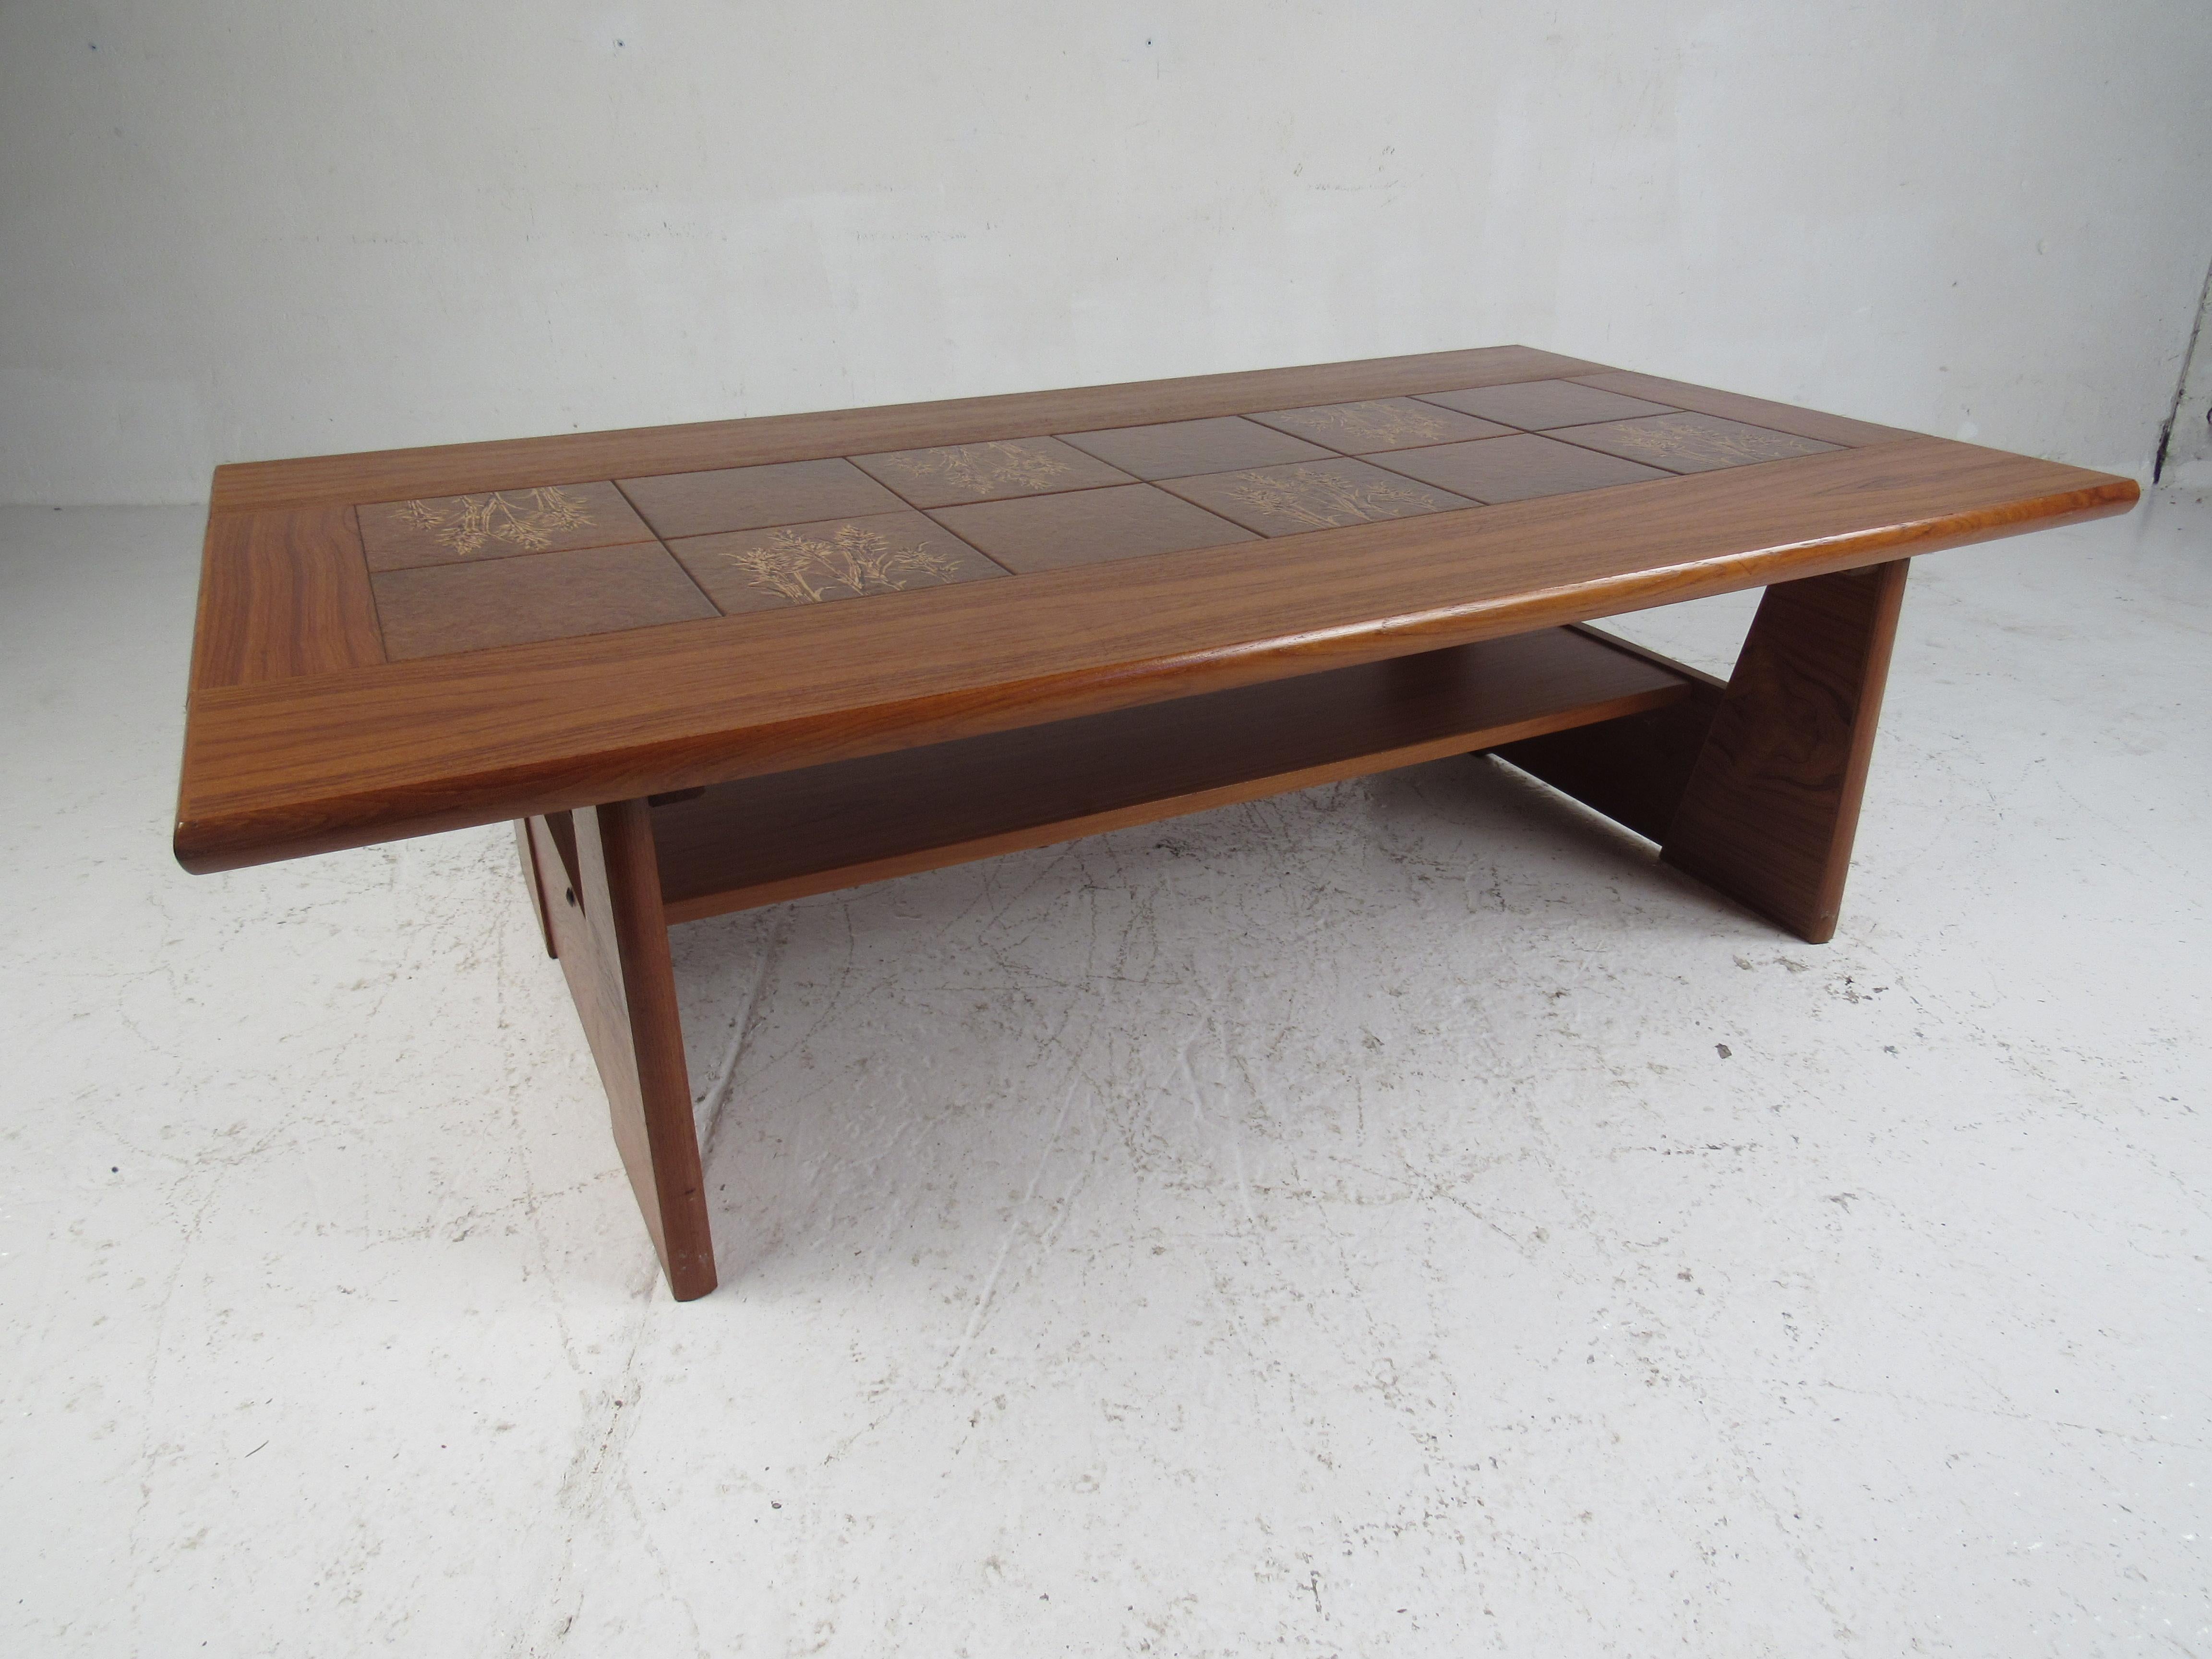 An elegant Mid-Century Modern coffee table with a tile top and elegant teak wood grain. This Gangsø Møbler style coffee table boasts unusual sled style legs with a stretcher running all the way across. Wonderful designs on the tile and a rich teak